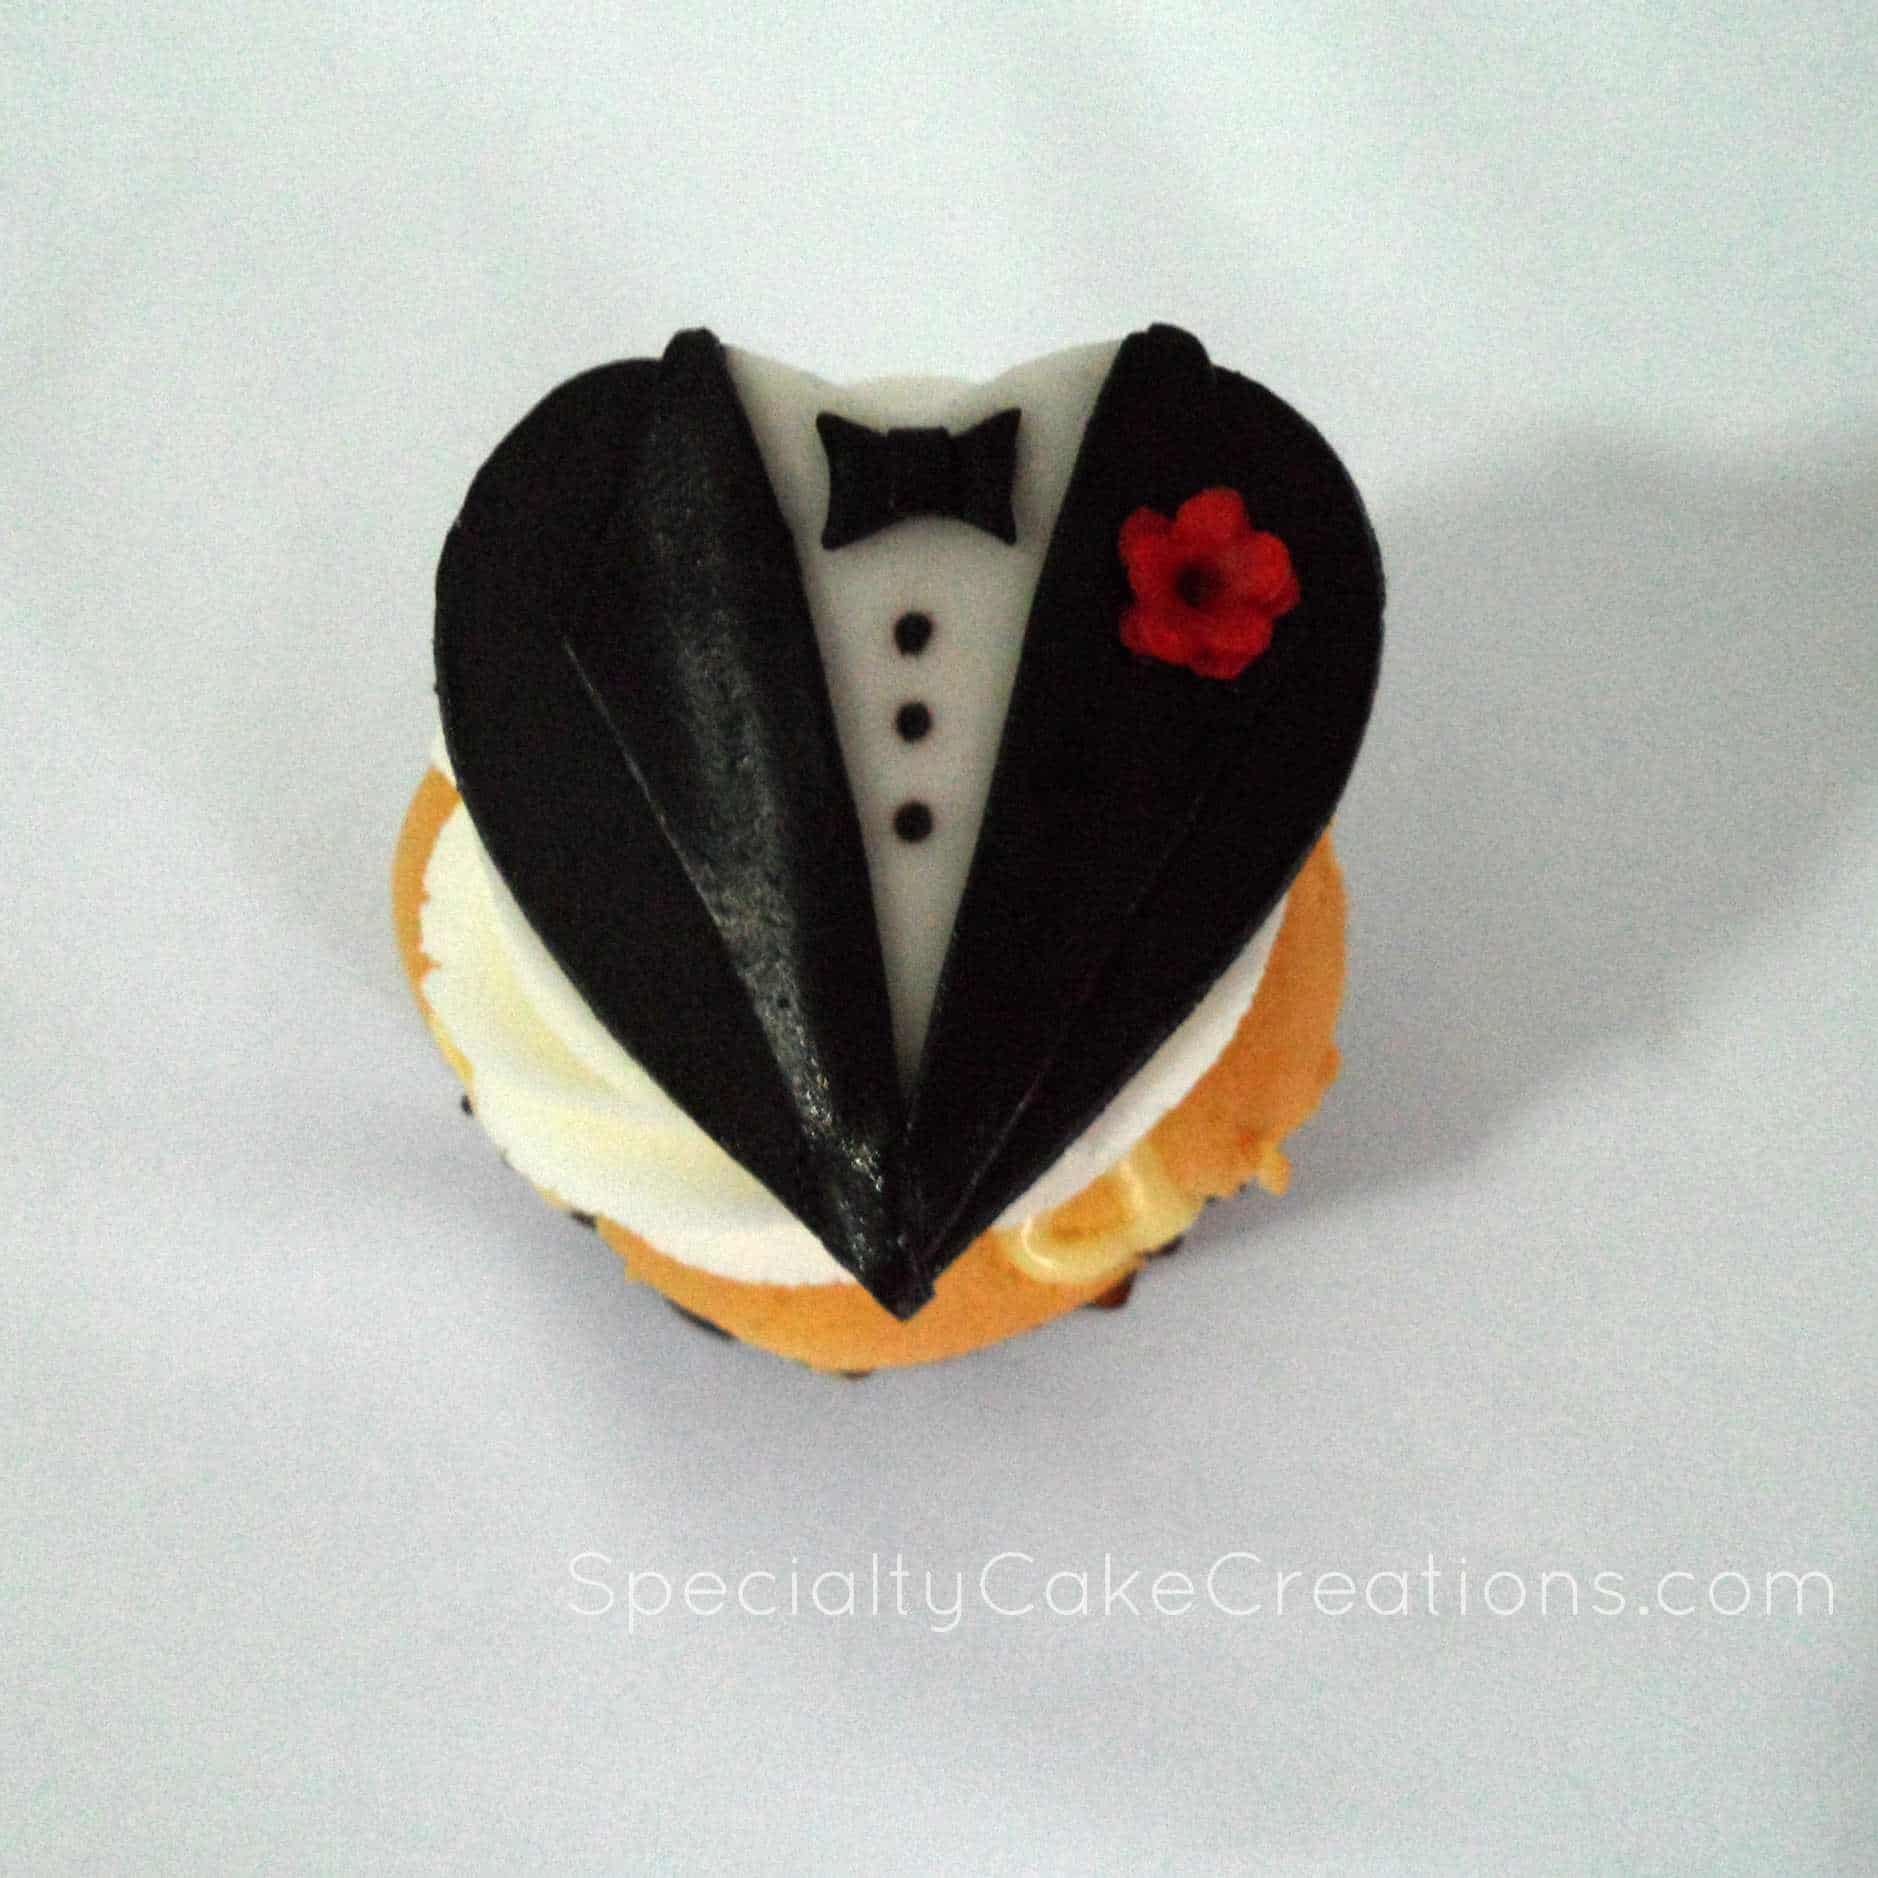 Cupcake with Groom Topper